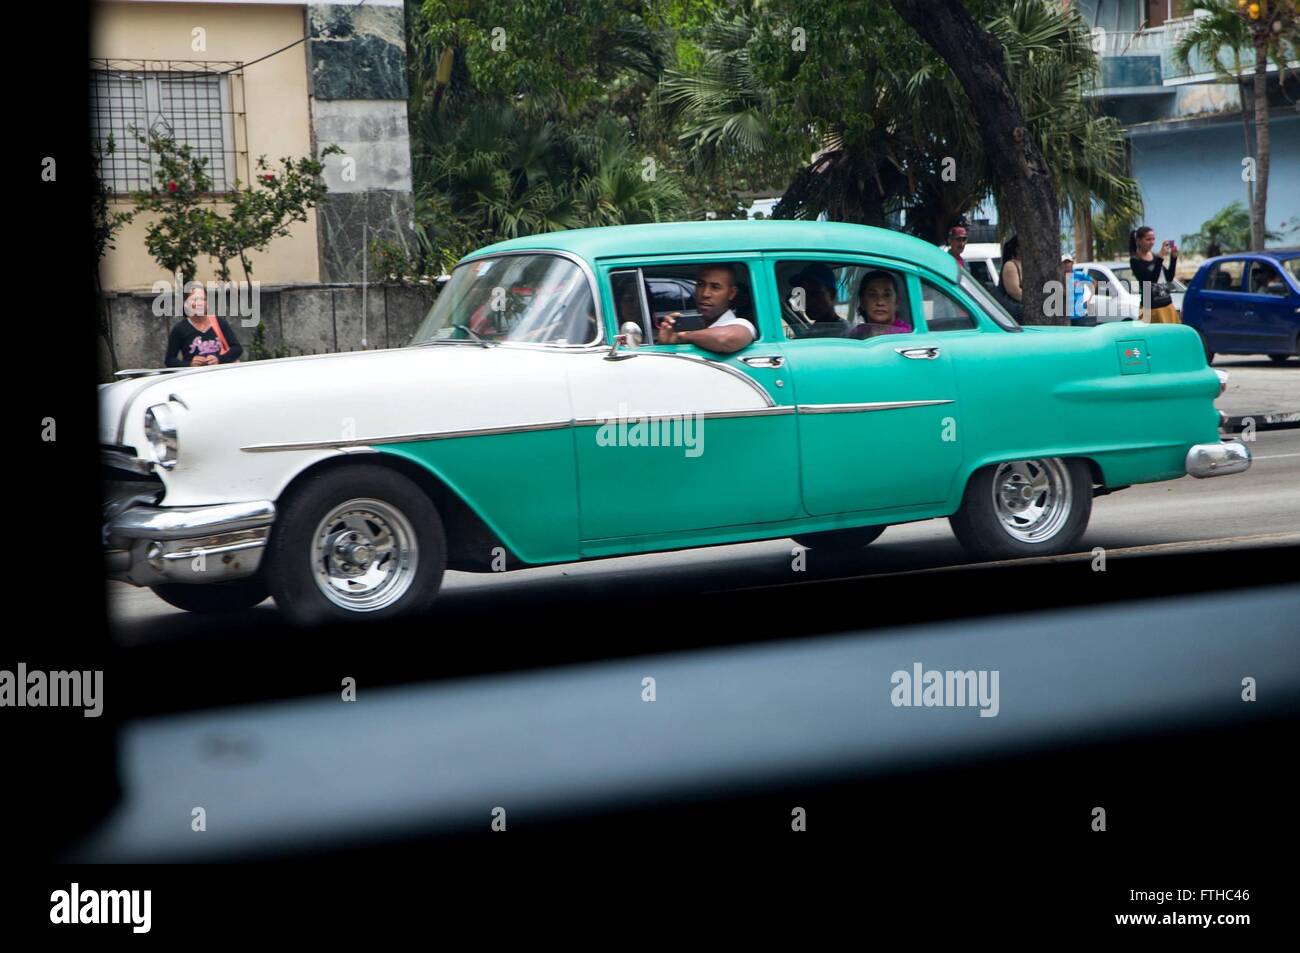 A vintage American car driven by a Cuban family watches as the motorcade of U.S President Barack Obama drives past during his historic visit to the island nation March 20, 2016 in Havana, Cuba. Stock Photo